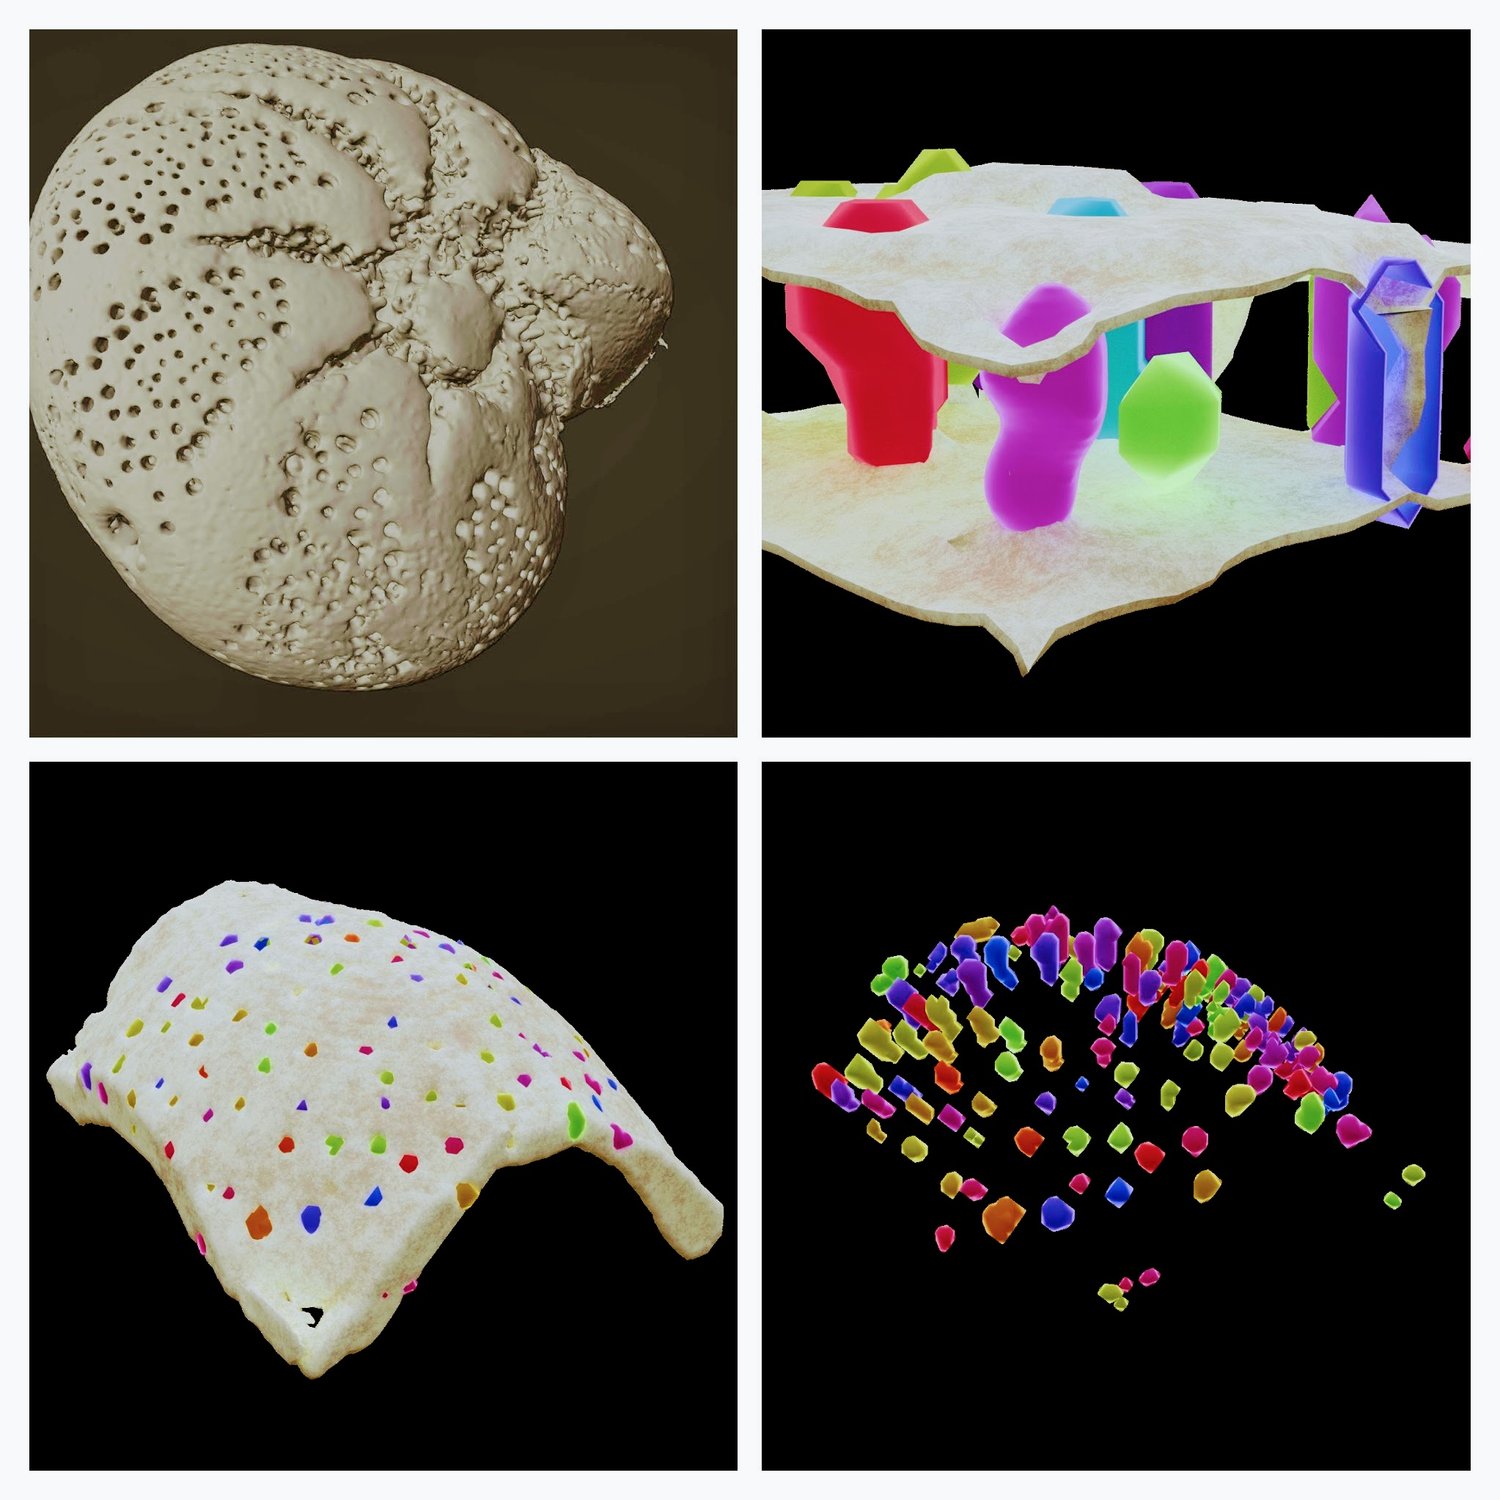 Hackathon: SynchroMage: 3D Tomography and Visualisation for Earth’s Hidden Treasures – Environment and Climate theme